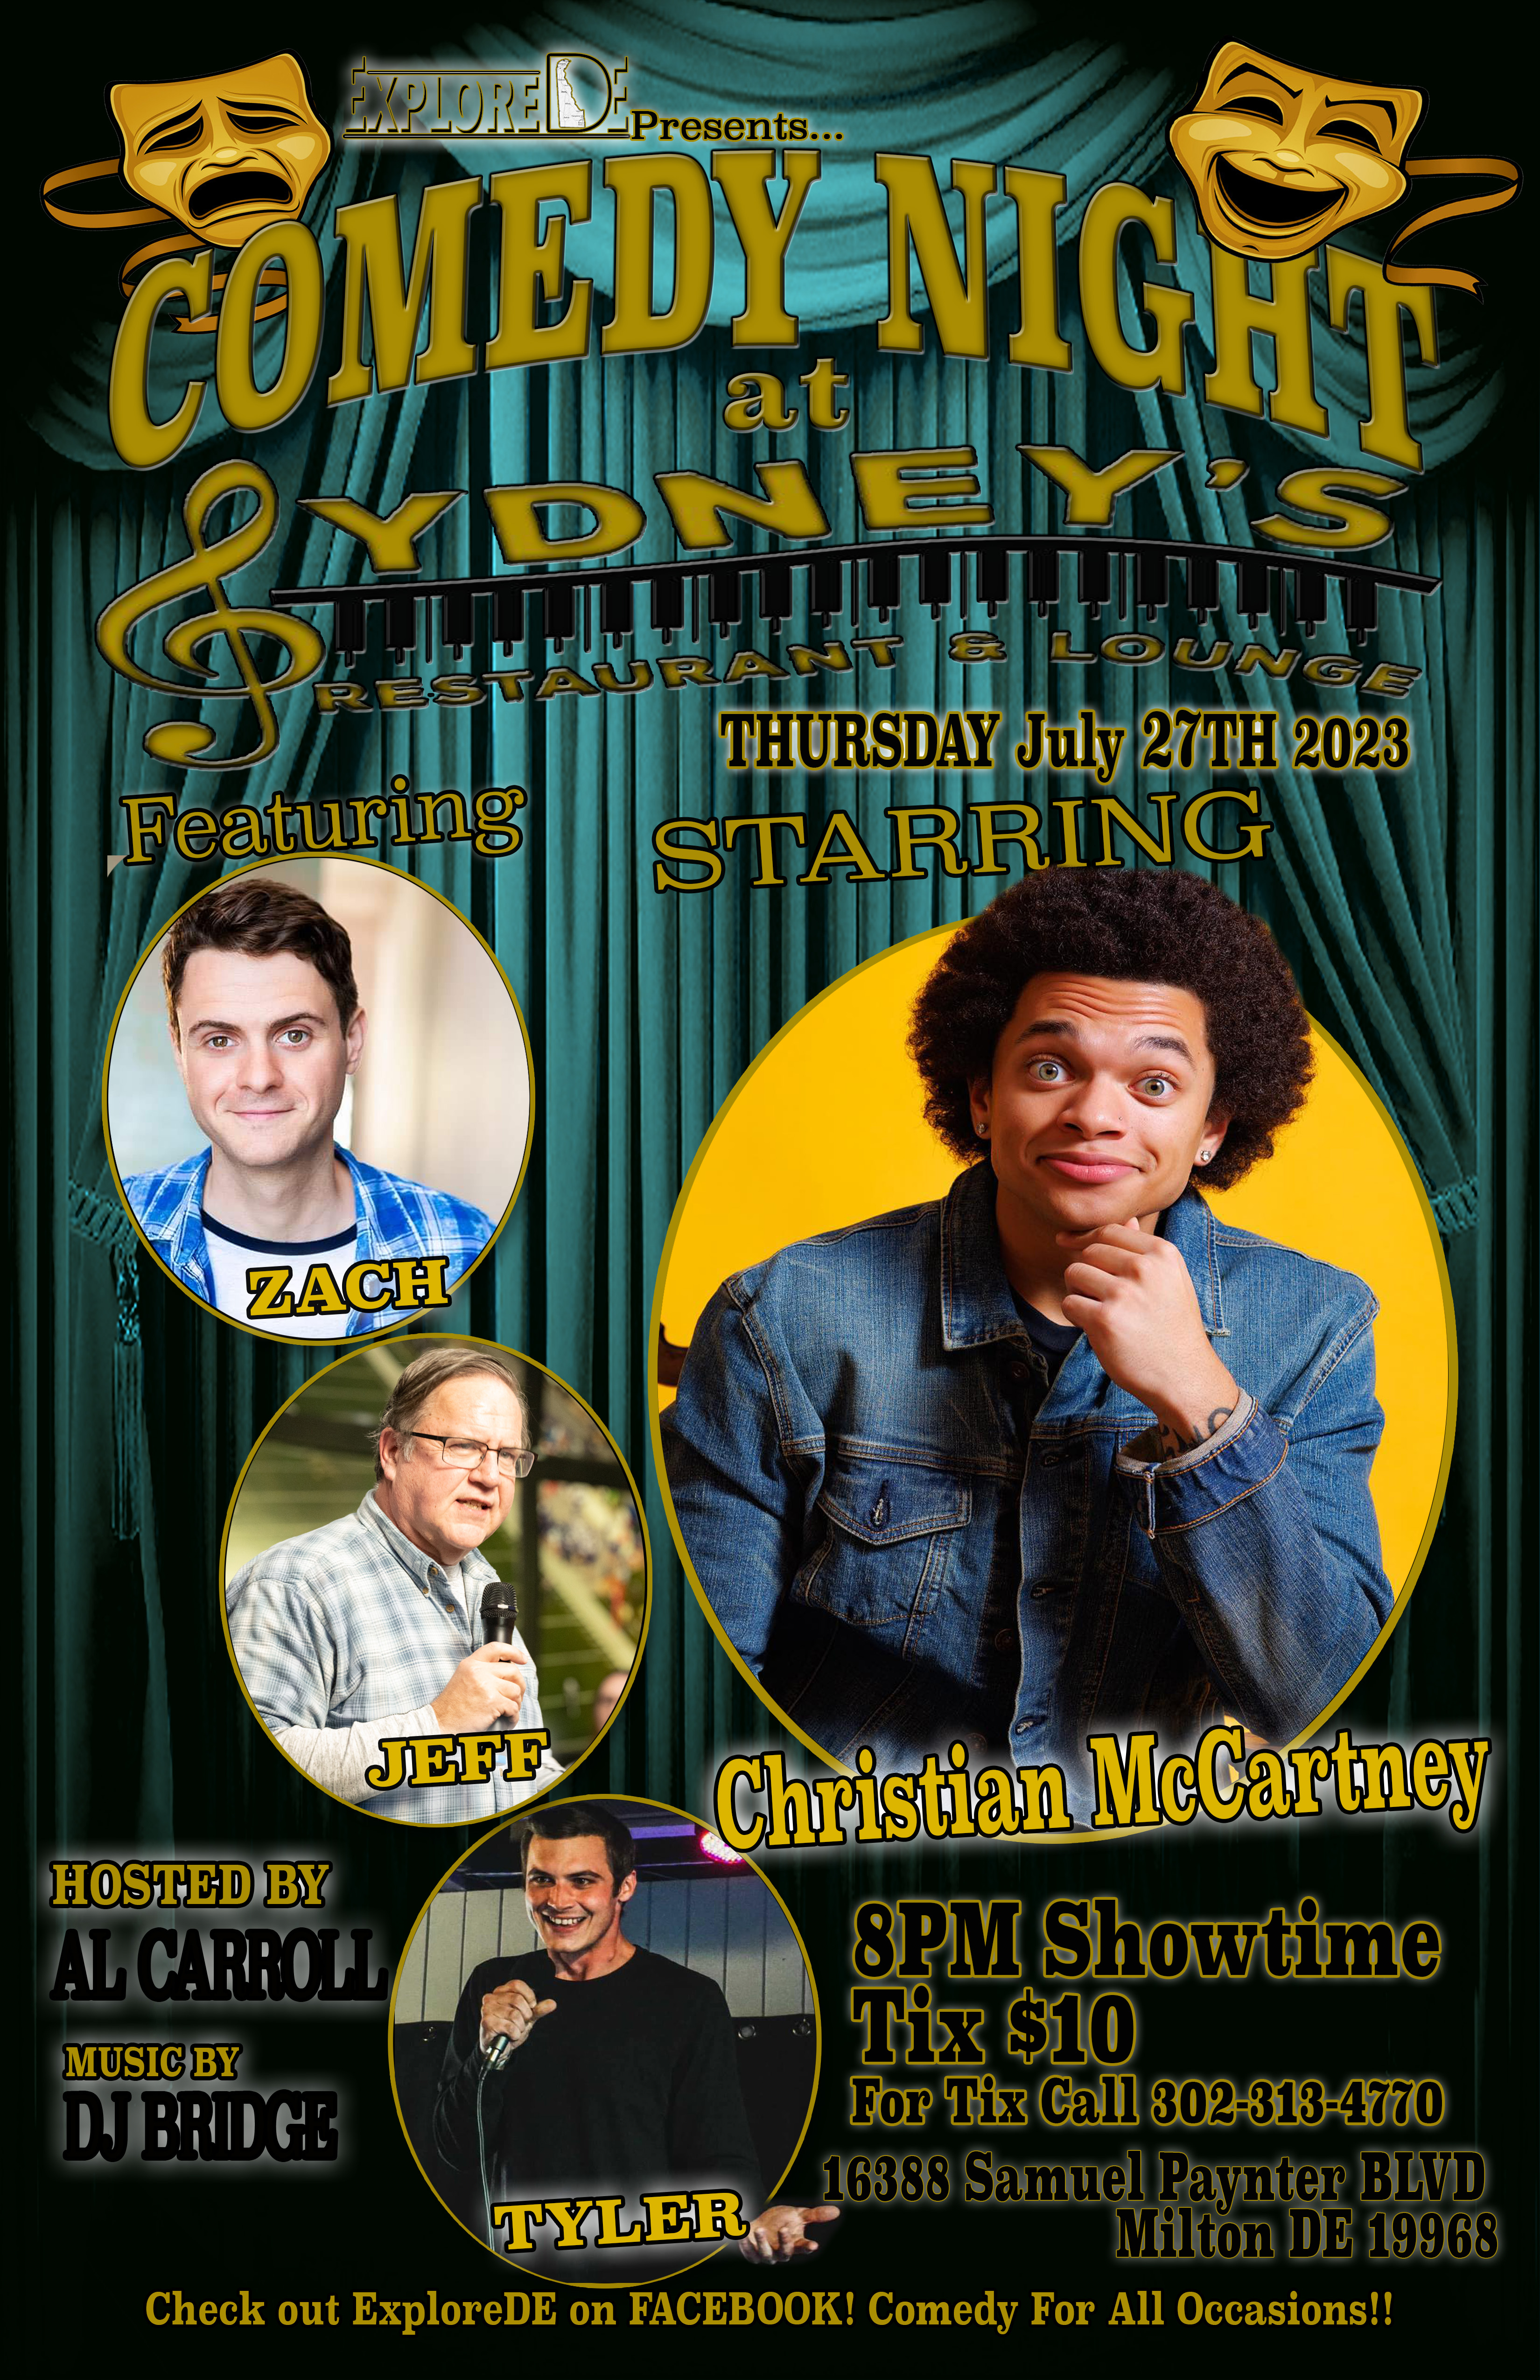 7/27 -Thursday Comedy Night hosted by Al Carroll starring Christian McCartney -8pm showtime